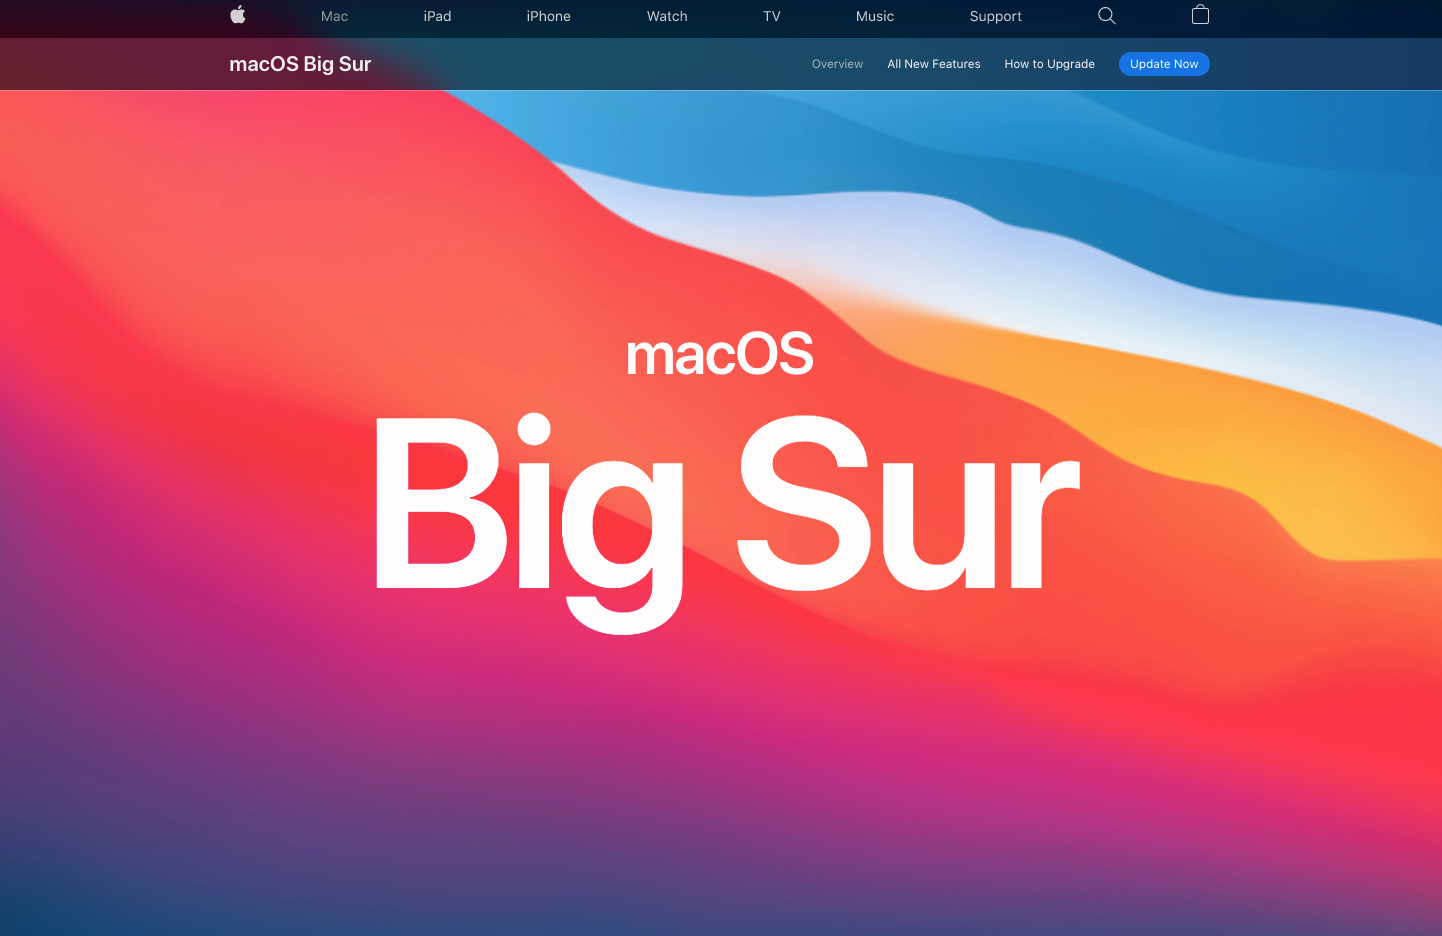 3D colors is another modern web design trend